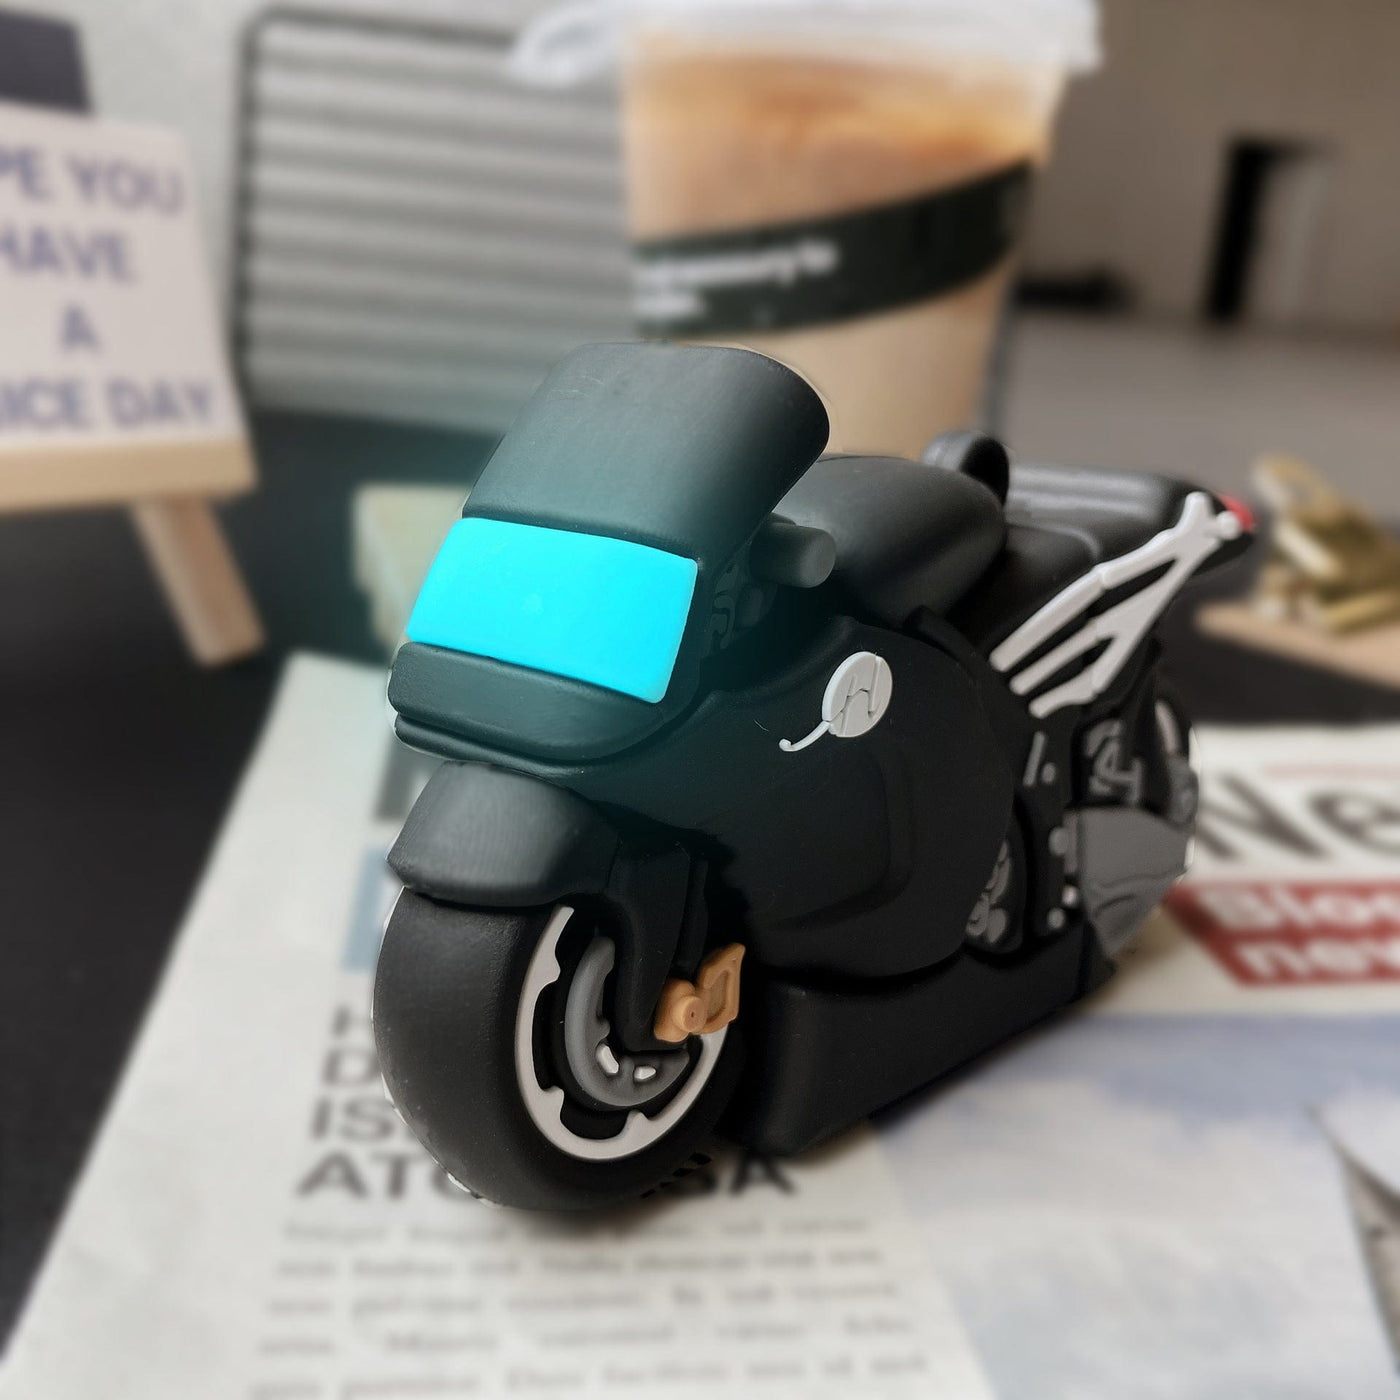 MOTORCYCLE AIRPODS PRO CASE - Smart Tech Shopping